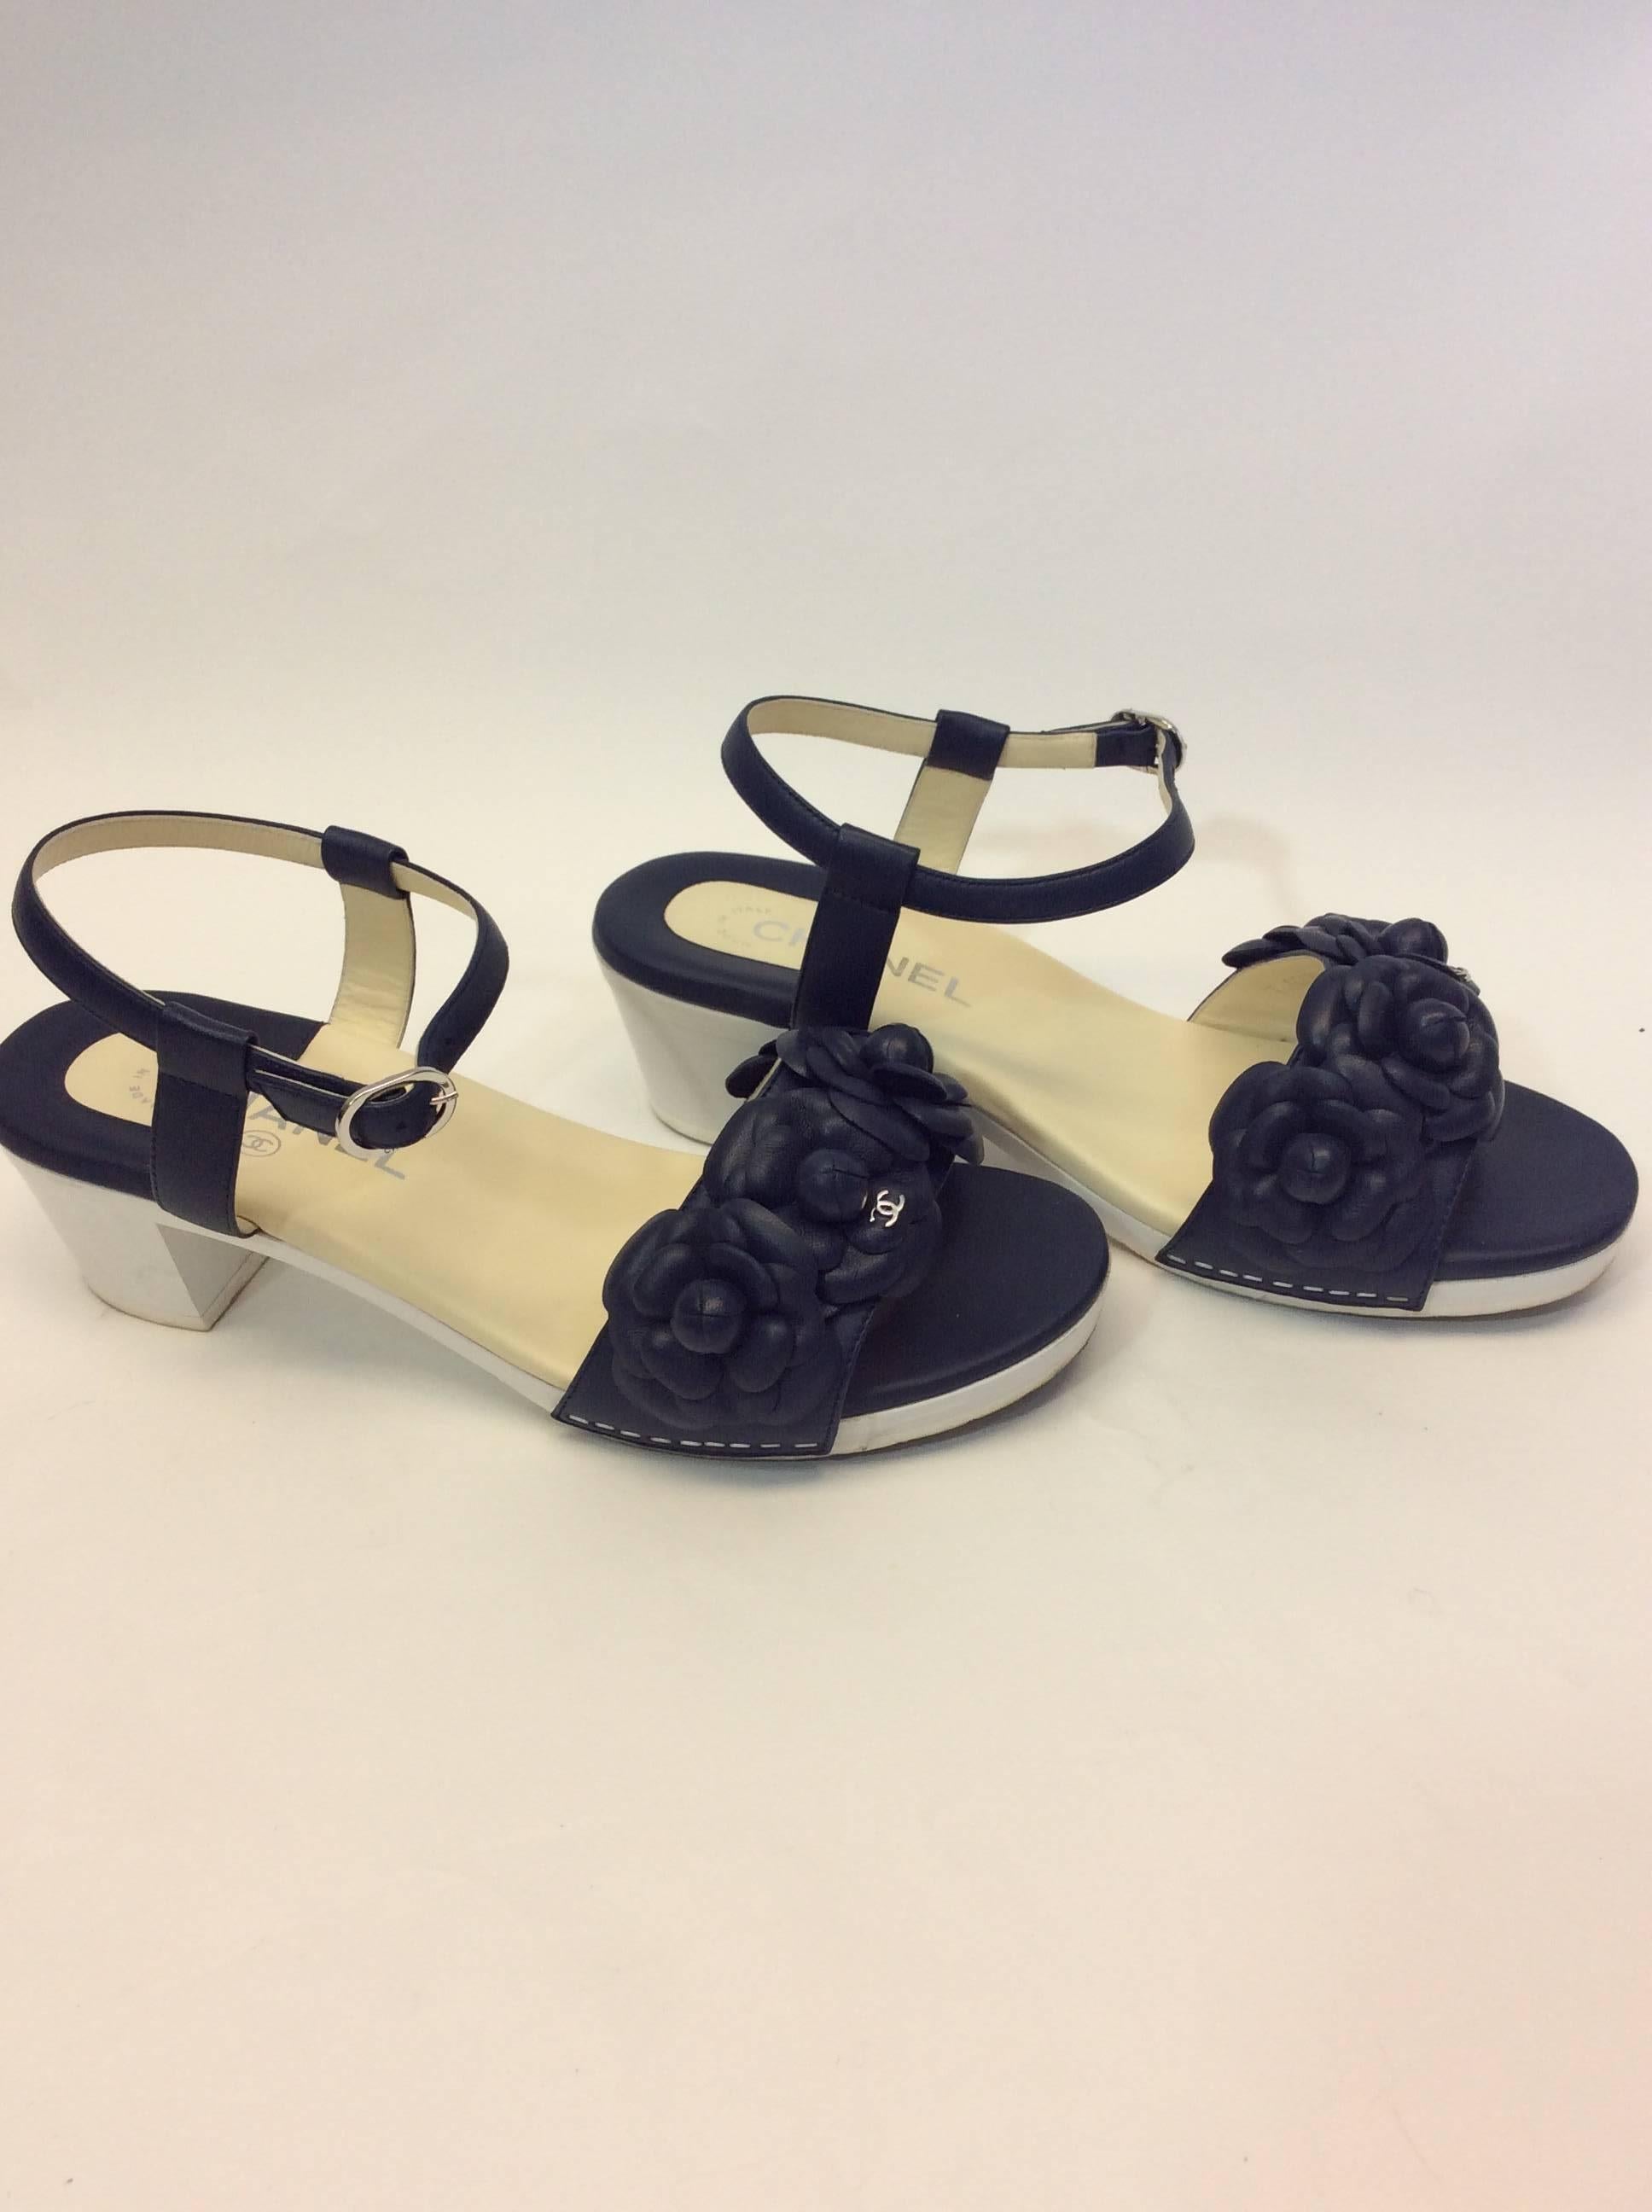 Chanel Navy Floral Strappy Sandal In Good Condition For Sale In Narberth, PA